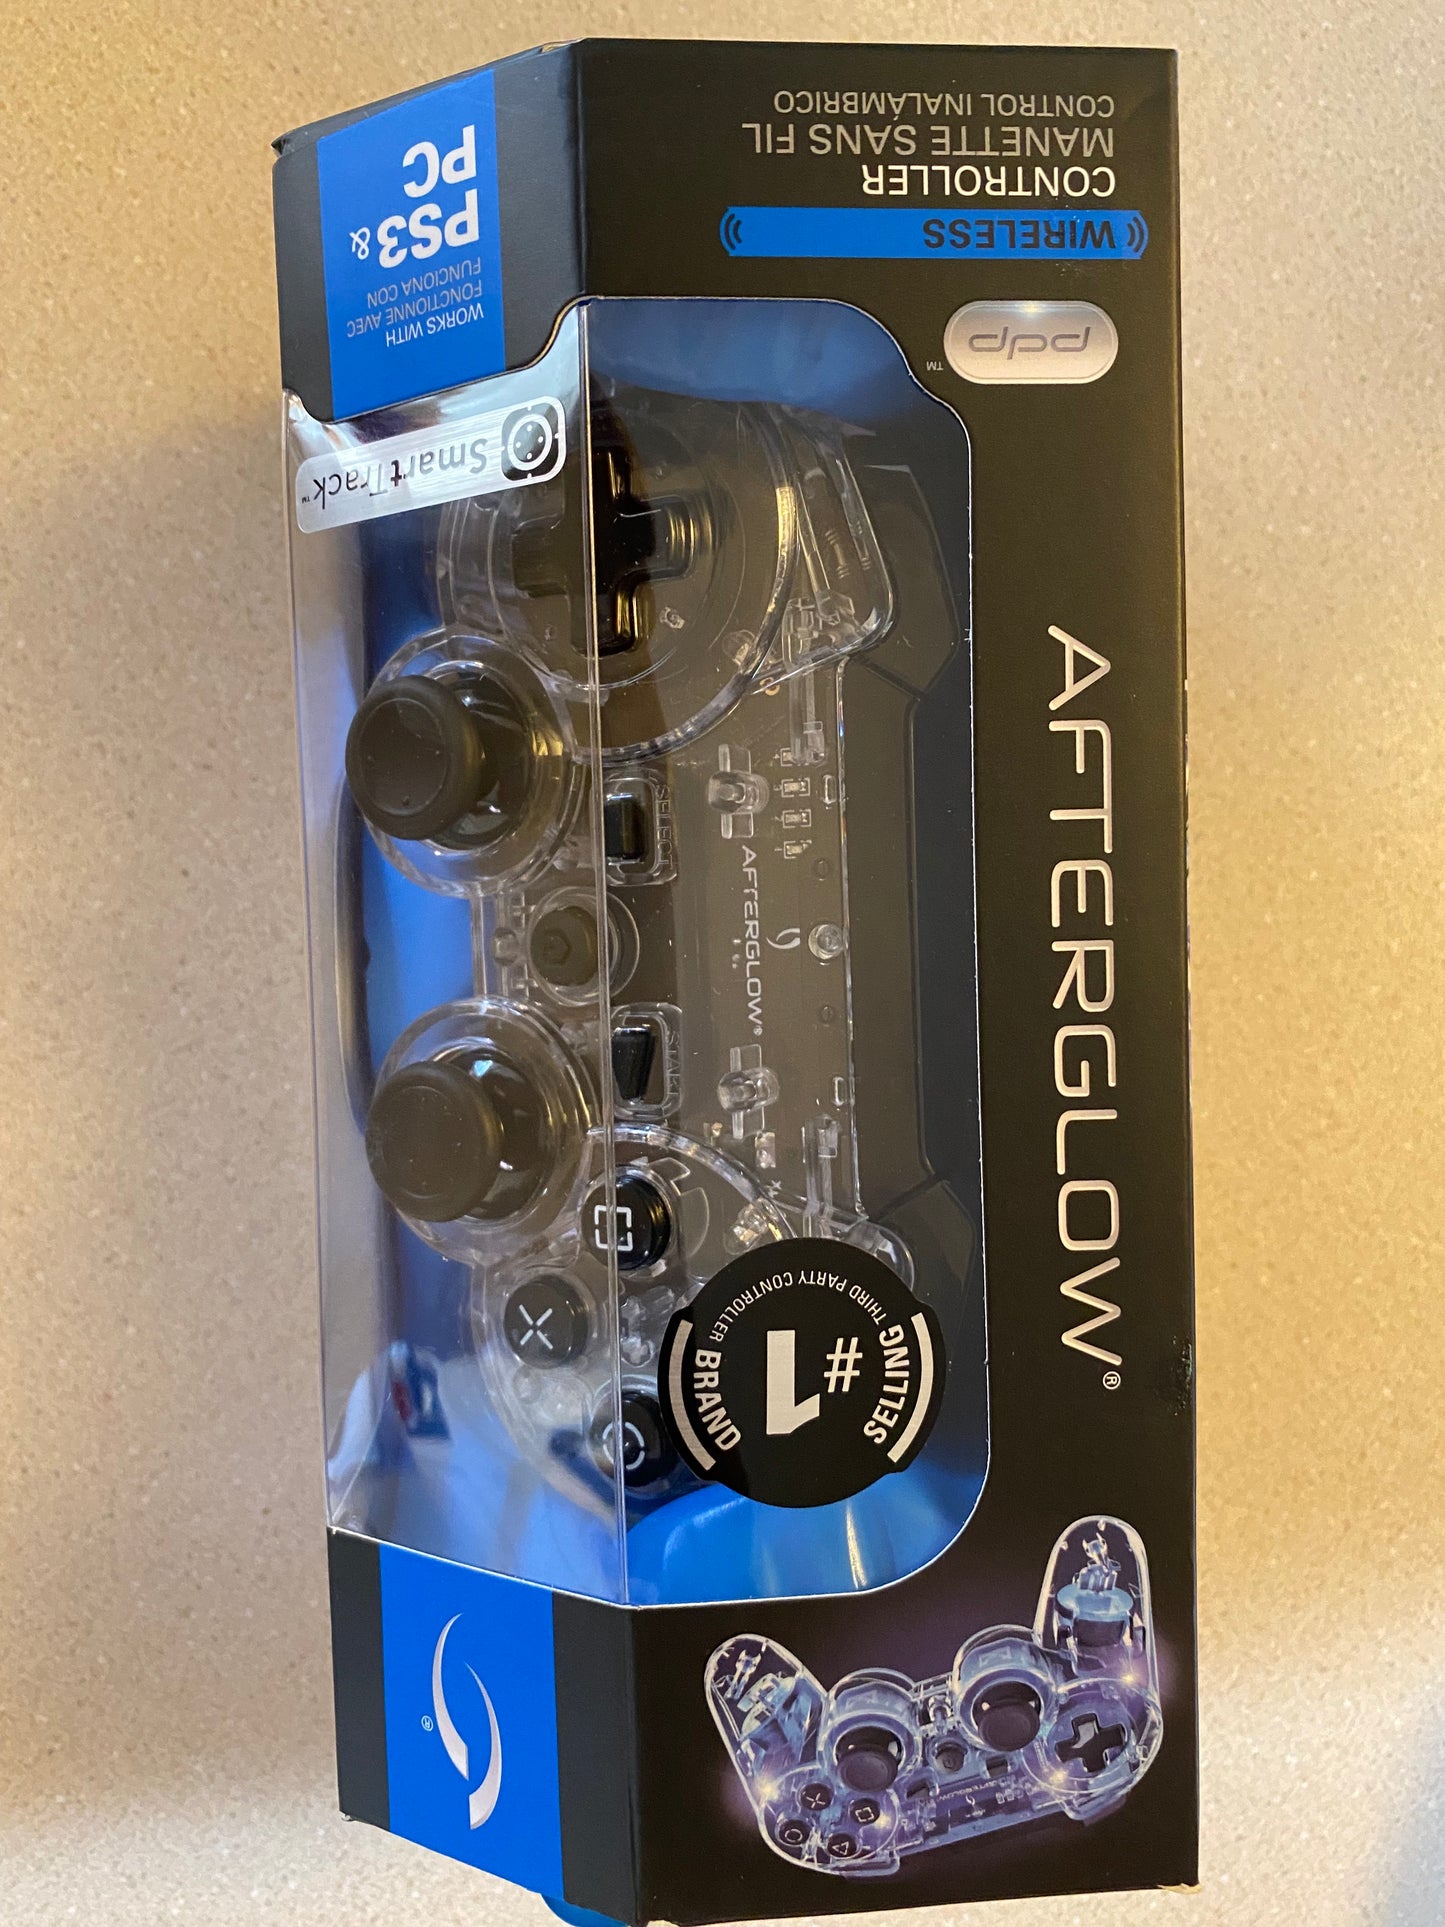 PDP Afterglow Blue Lighting Wireless Controller (for PS3 / PC)